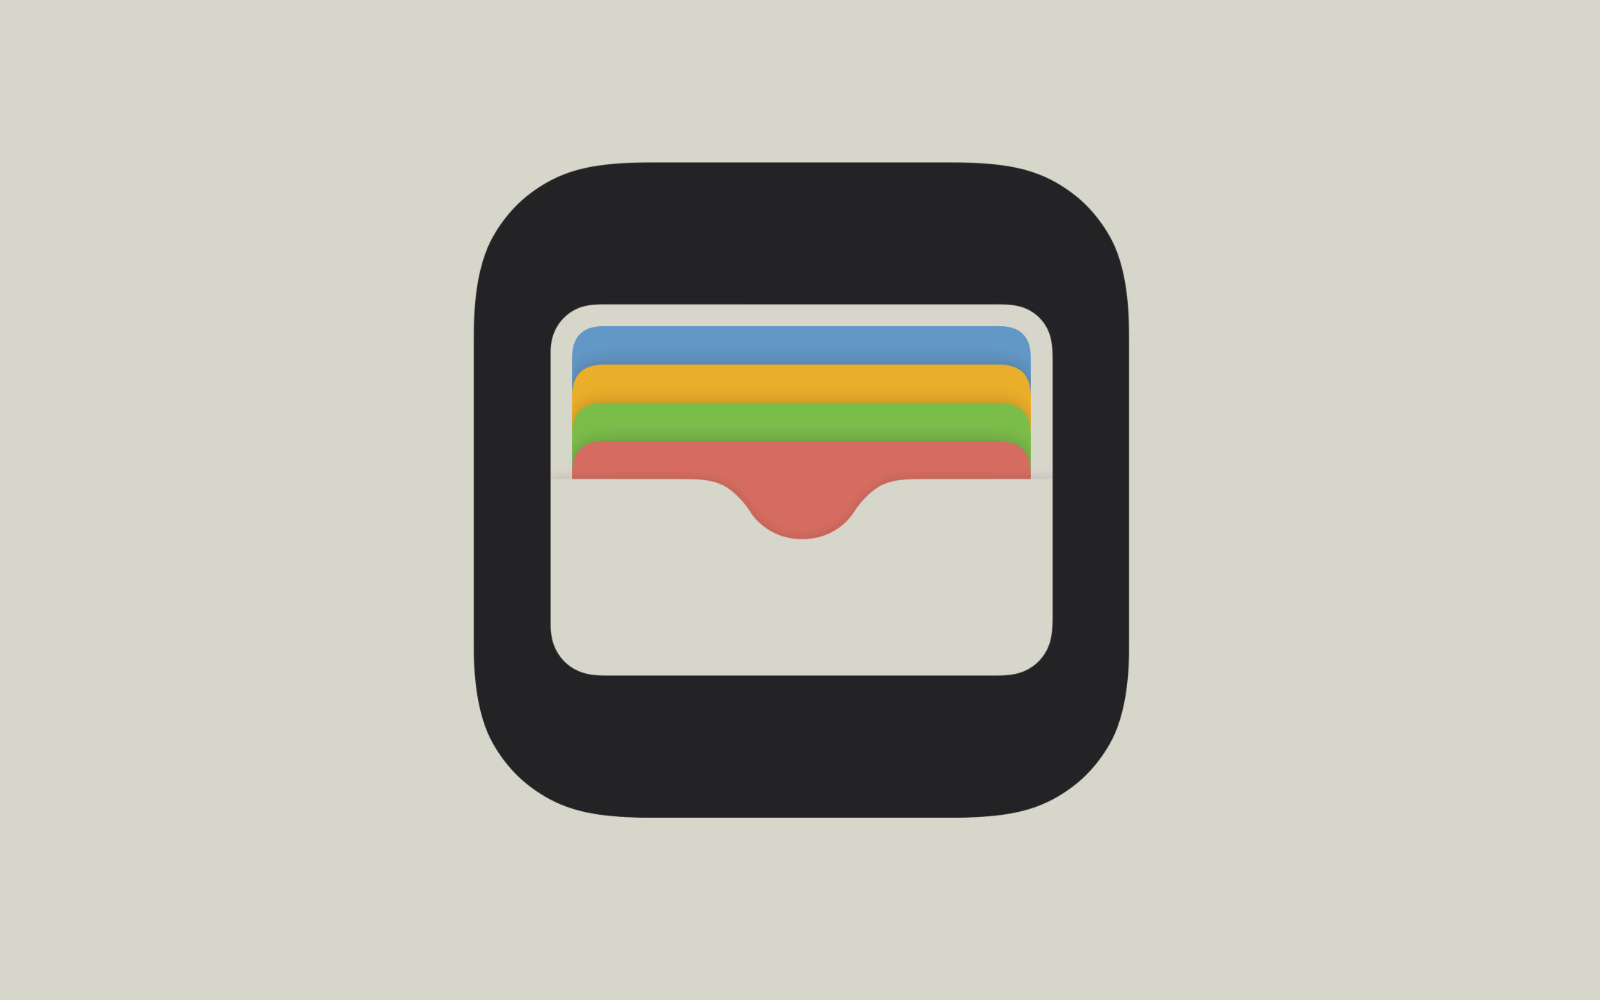 Wallet app icon on iphone